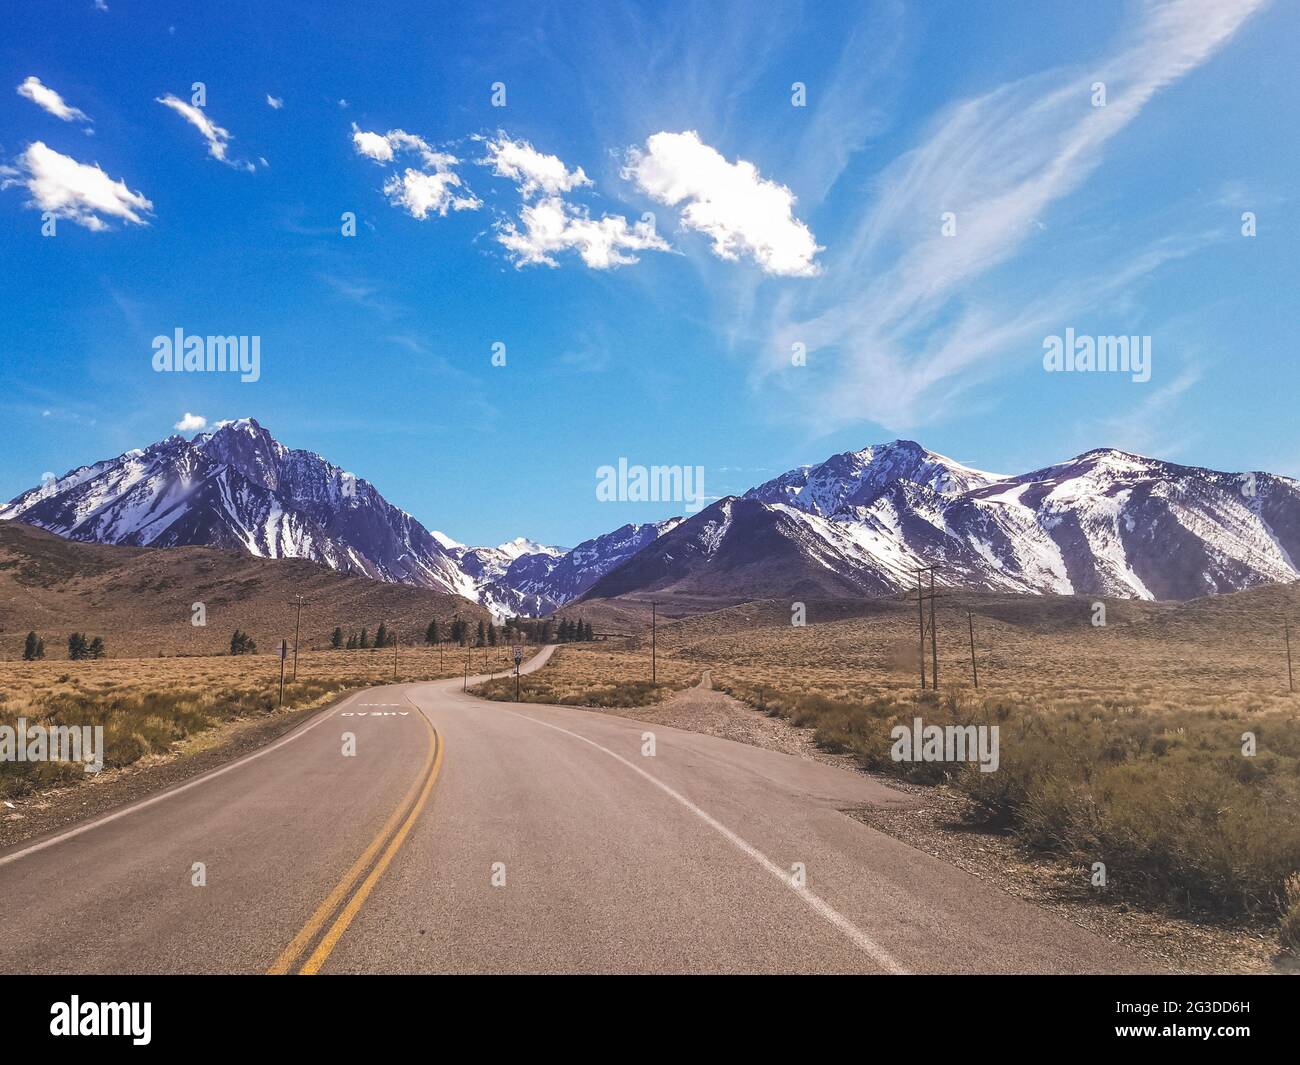 Road to Snow capped Sierra Nevada Mountains blue sky with clouds Stock Photo